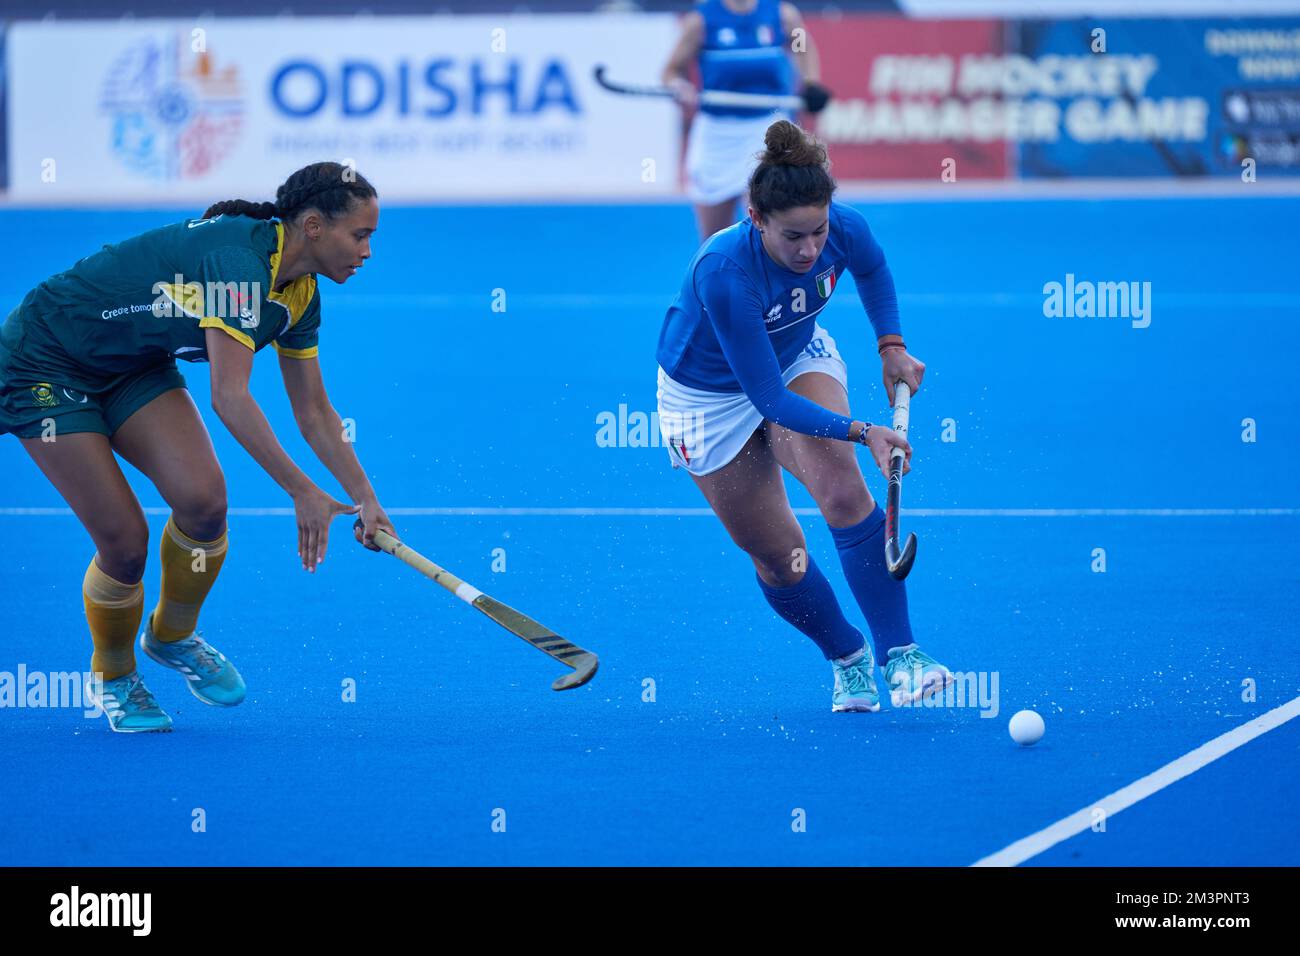 Valencia, Spain. 16th Dec, 2022. Kayla Miche Swarts (L) of South Africa and Federica  Carta (R) of Italy in action during the 2022 Women's FIH Hockey Nations Cup  between Italy and South